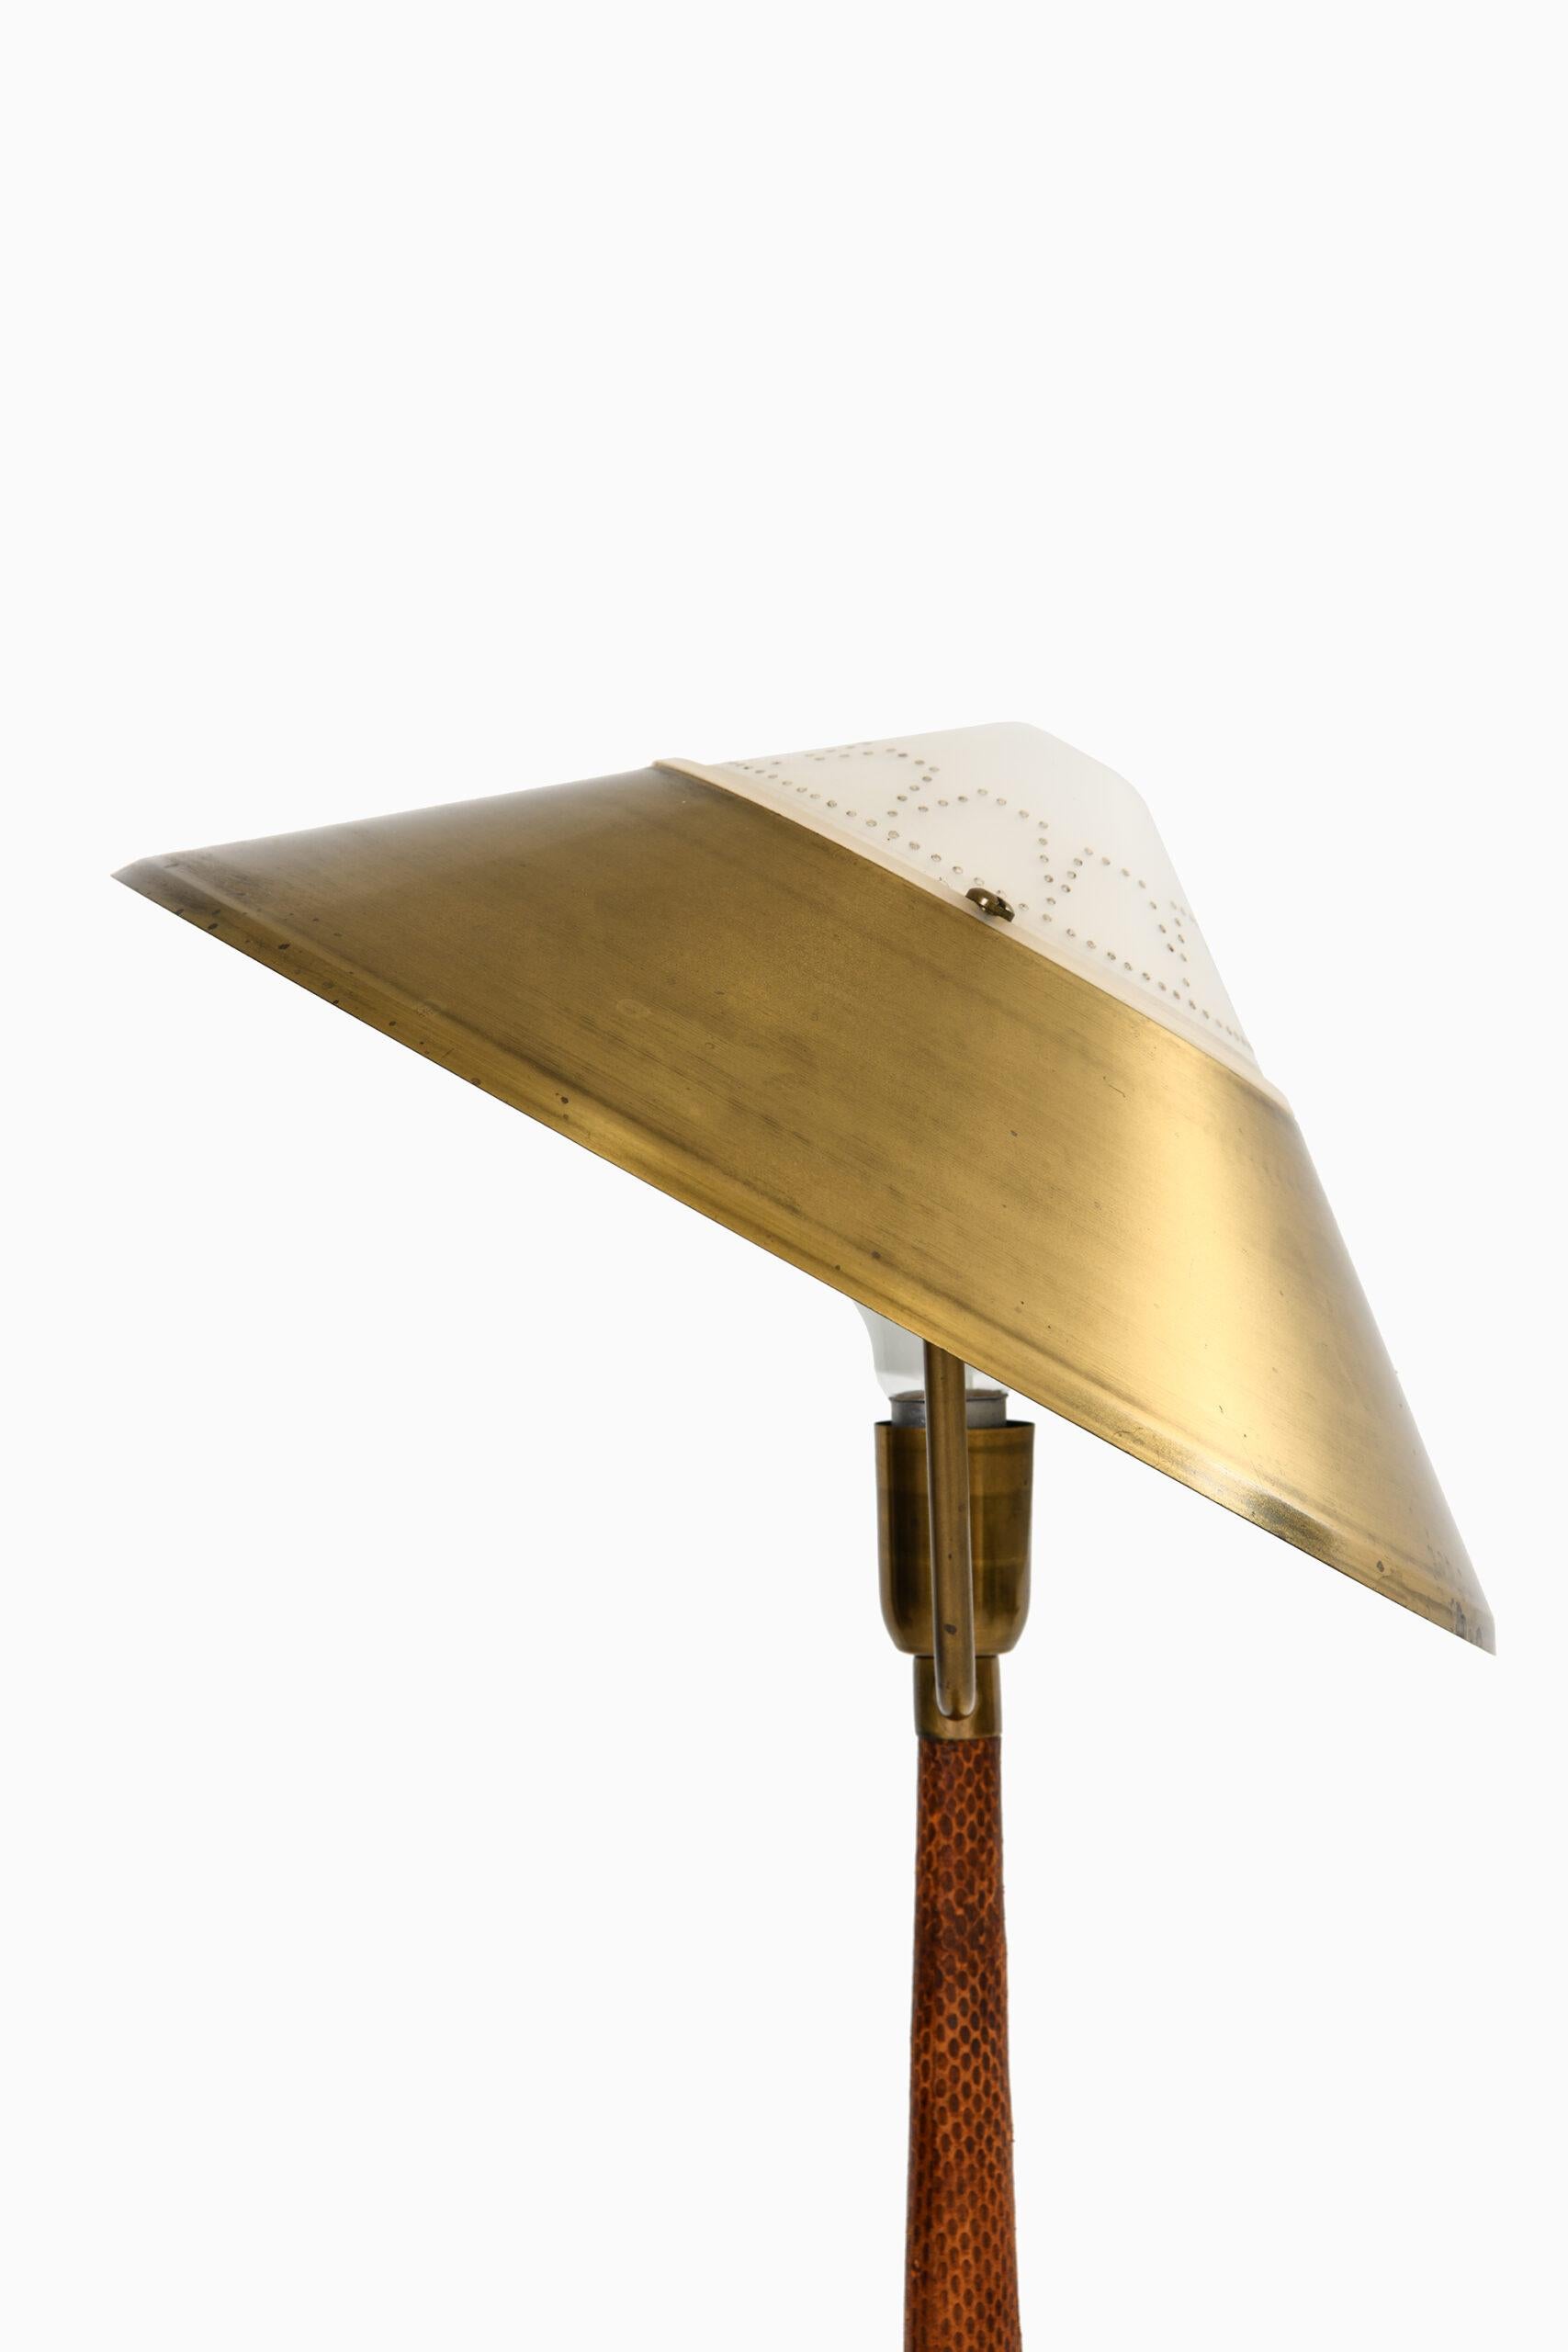 Scandinavian Modern Table Lamp Produced by AB E. Hansson & Co in Malmö, Sweden For Sale